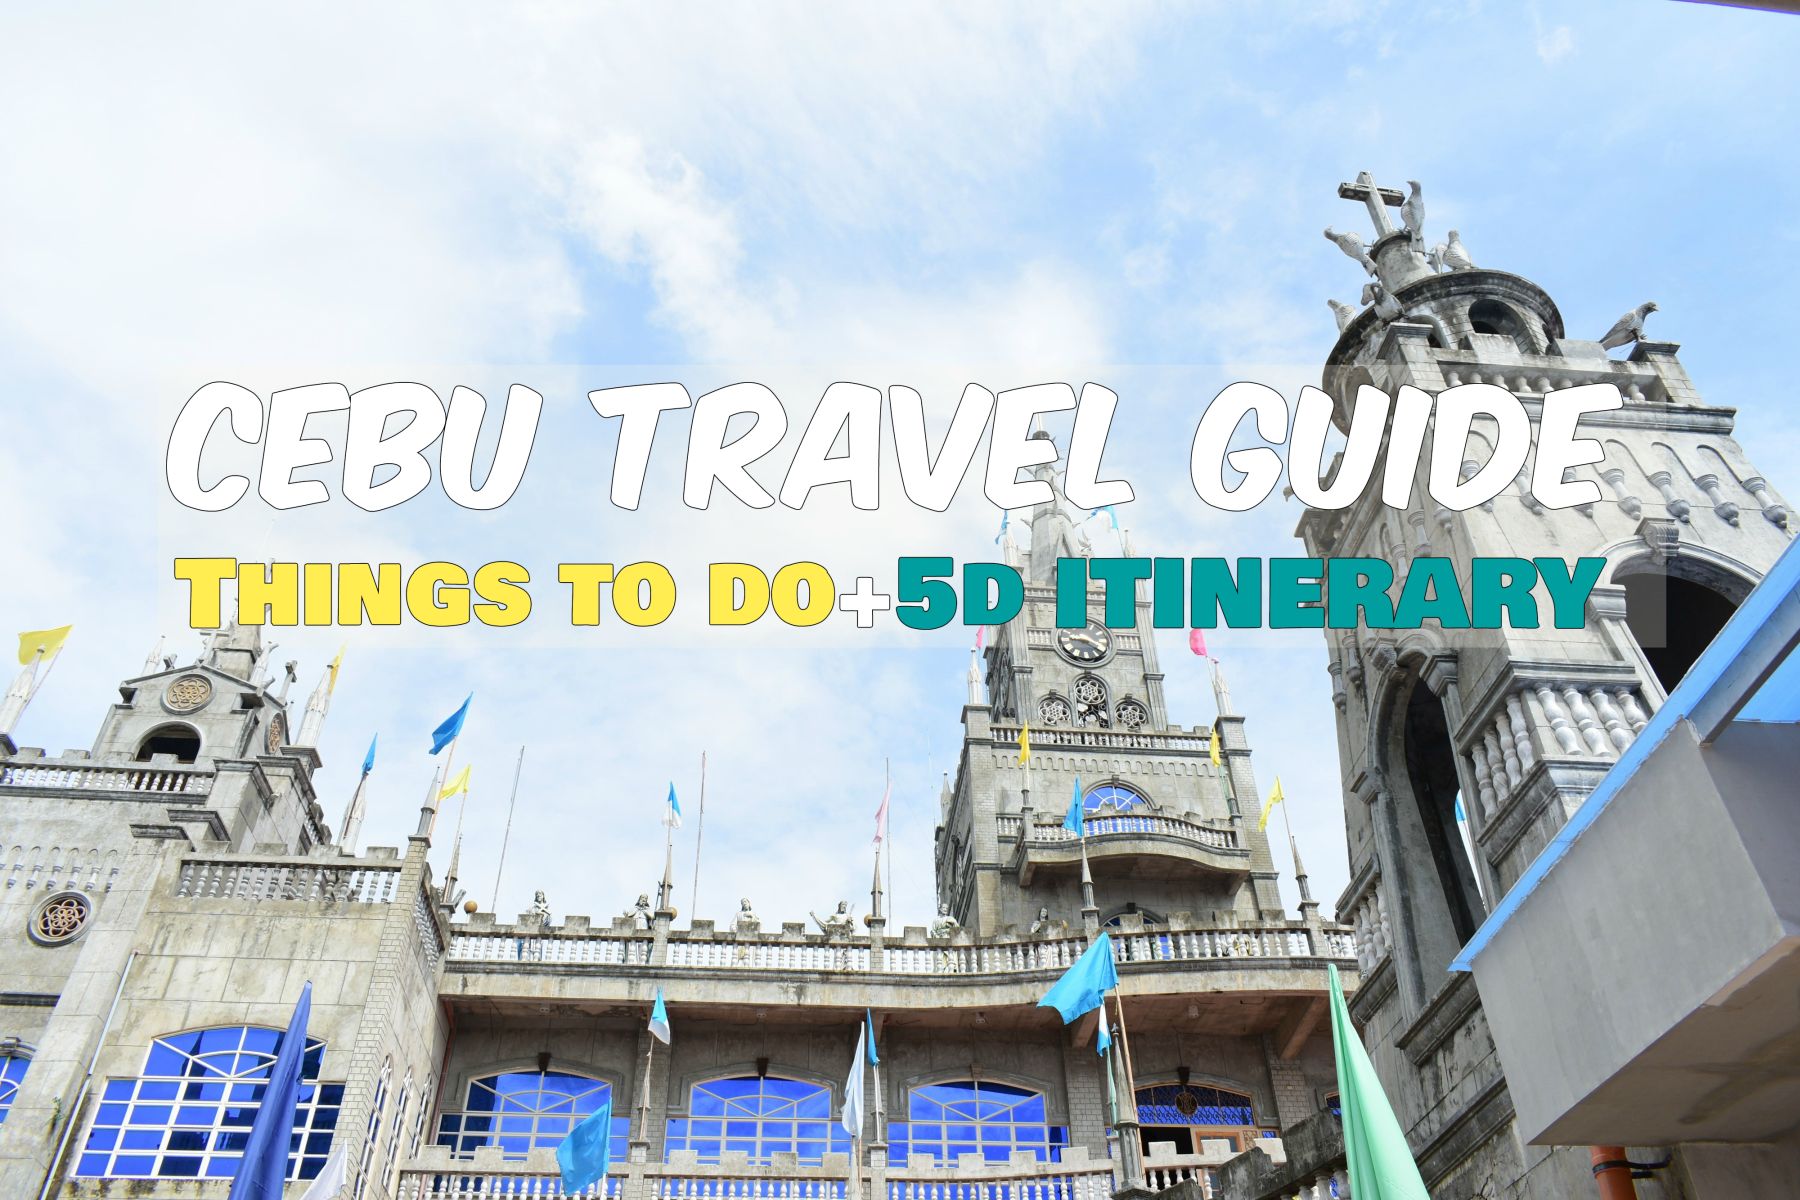 Travel Guide: Things To Do In Metro Cebu and South Cebu In 2018 + 5-Day Itinerary